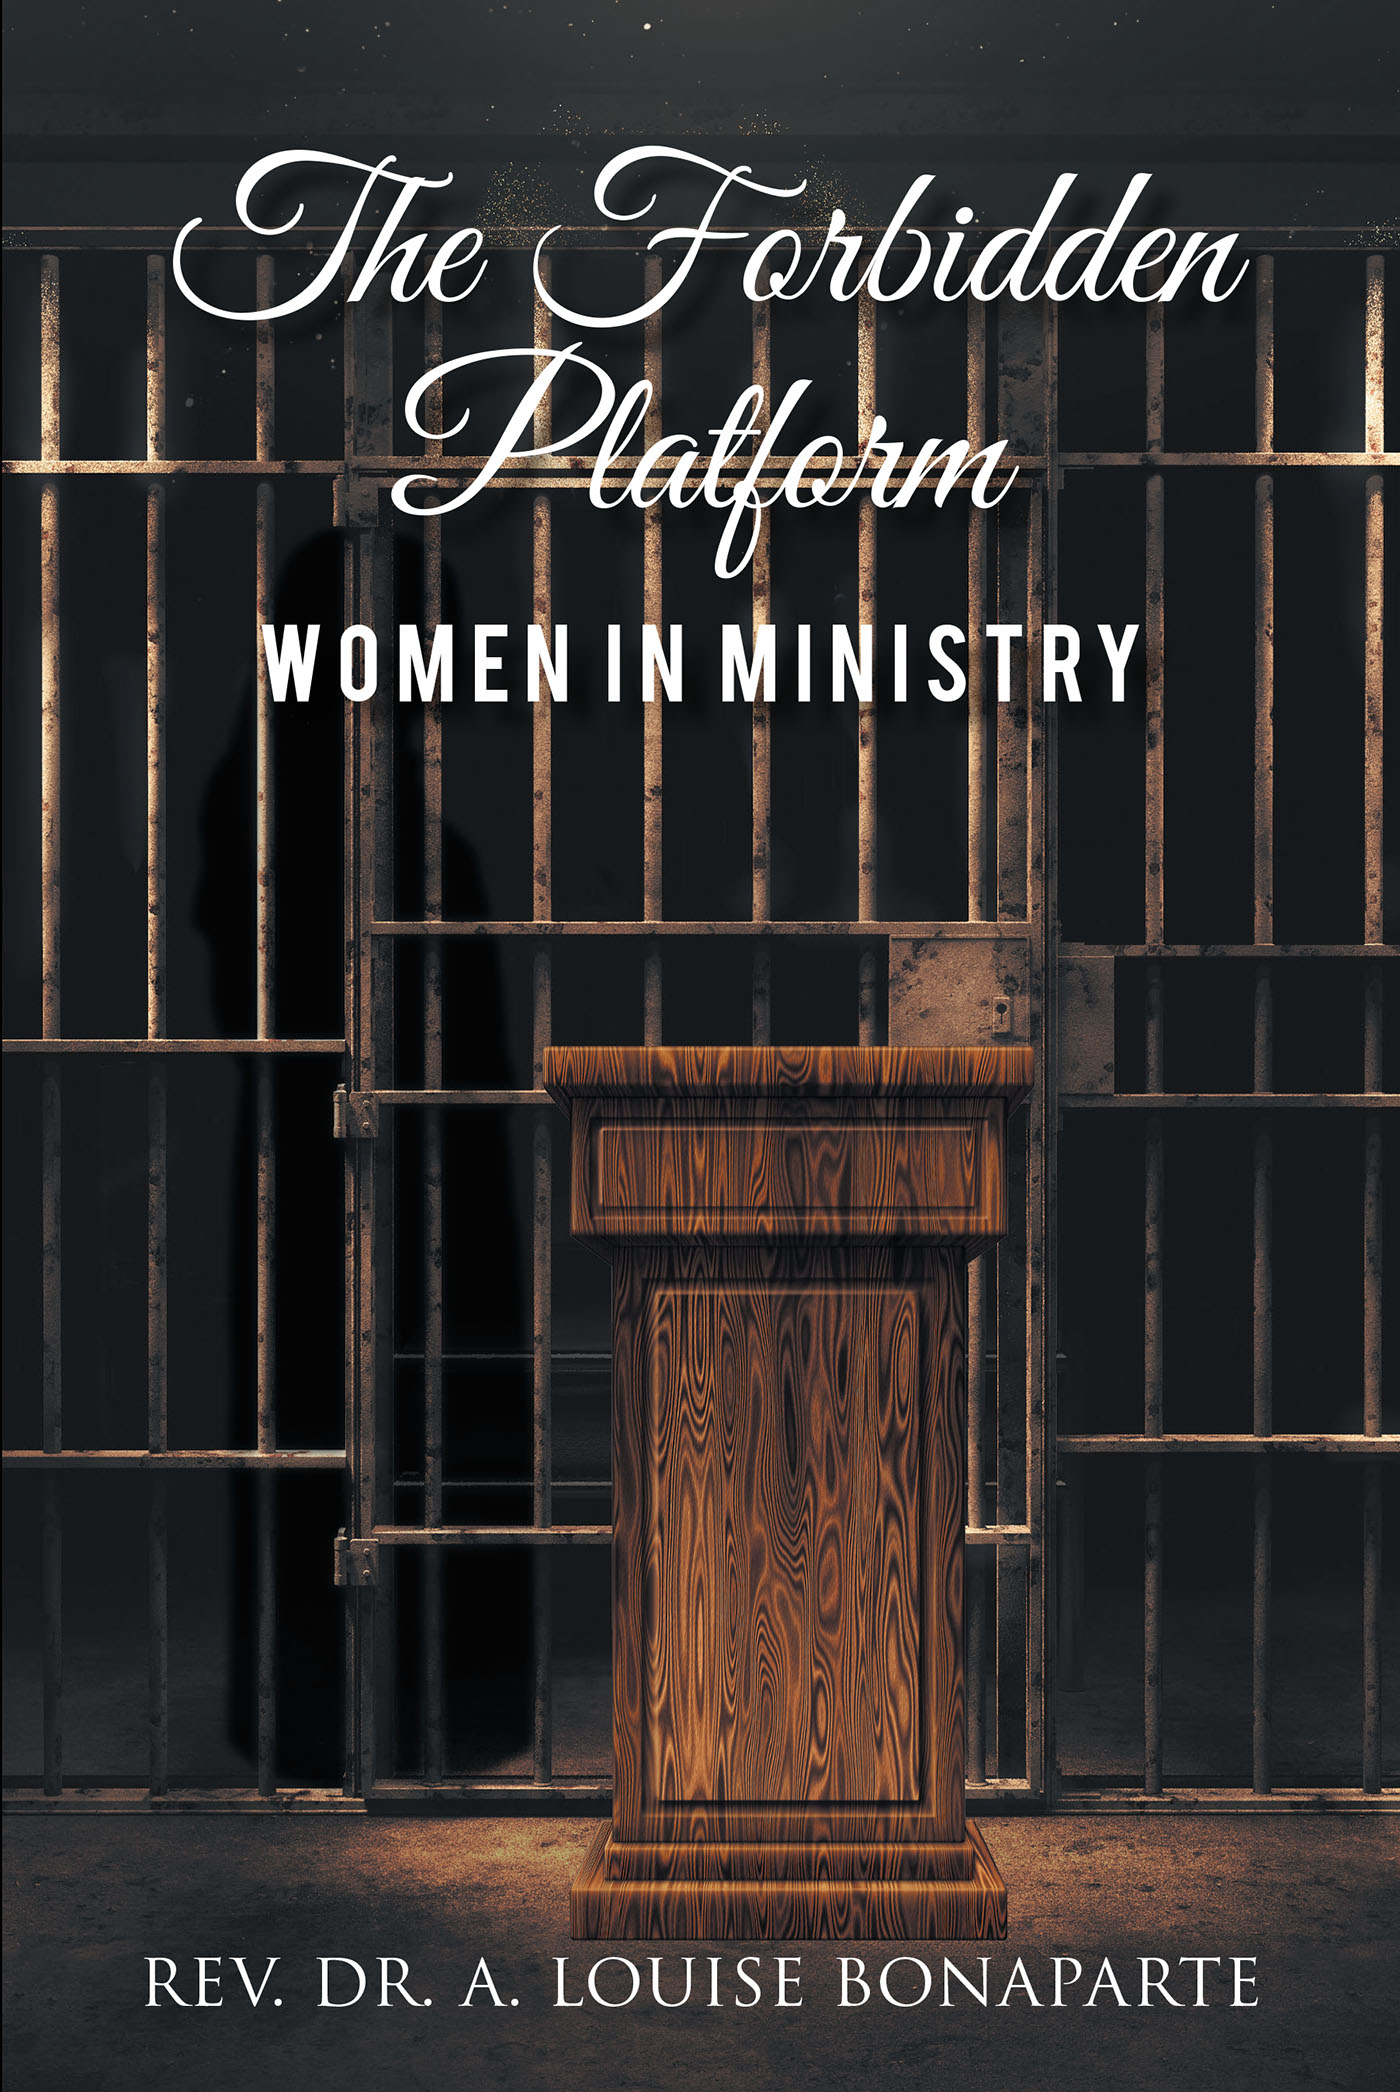 Rev. Dr. A. Louise Bonaparte’s Newly Released "The Forbidden Platform: Women in Ministry" is a Compelling Discussion of Female Leadership